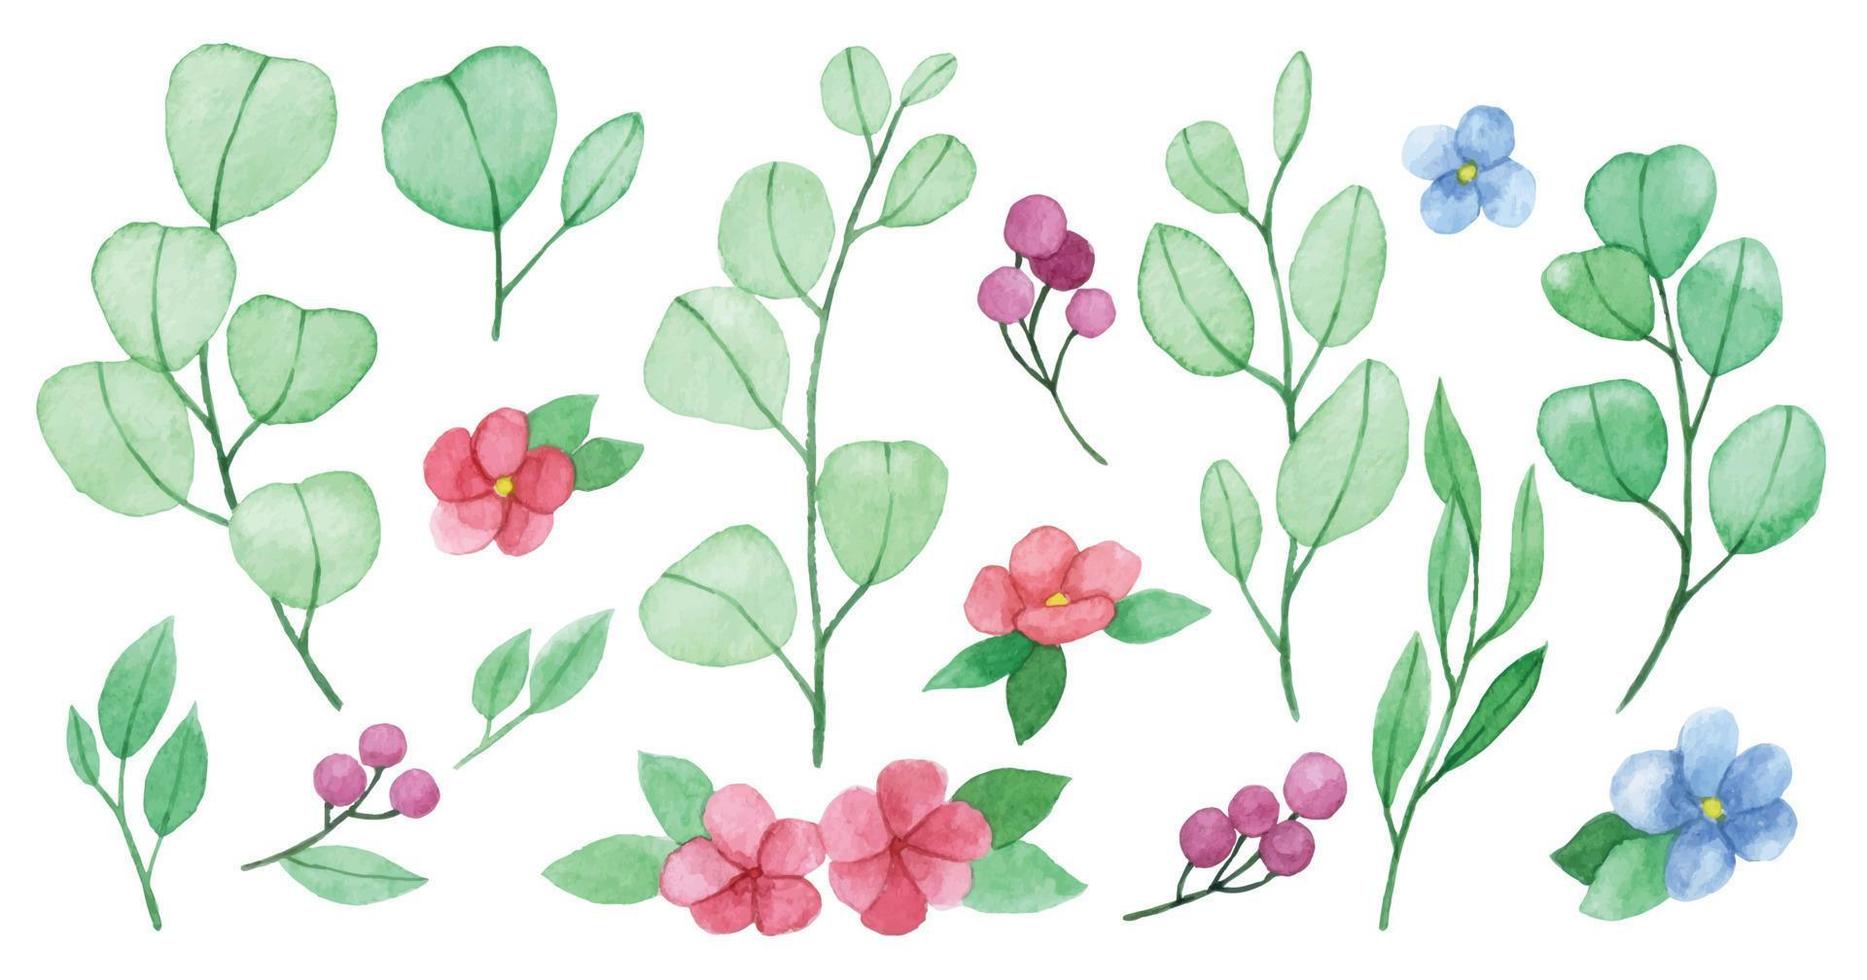 watercolor drawing. set of cute eucalyptus leaves, flowers and berries. simple stylized drawing in pastel colors vector